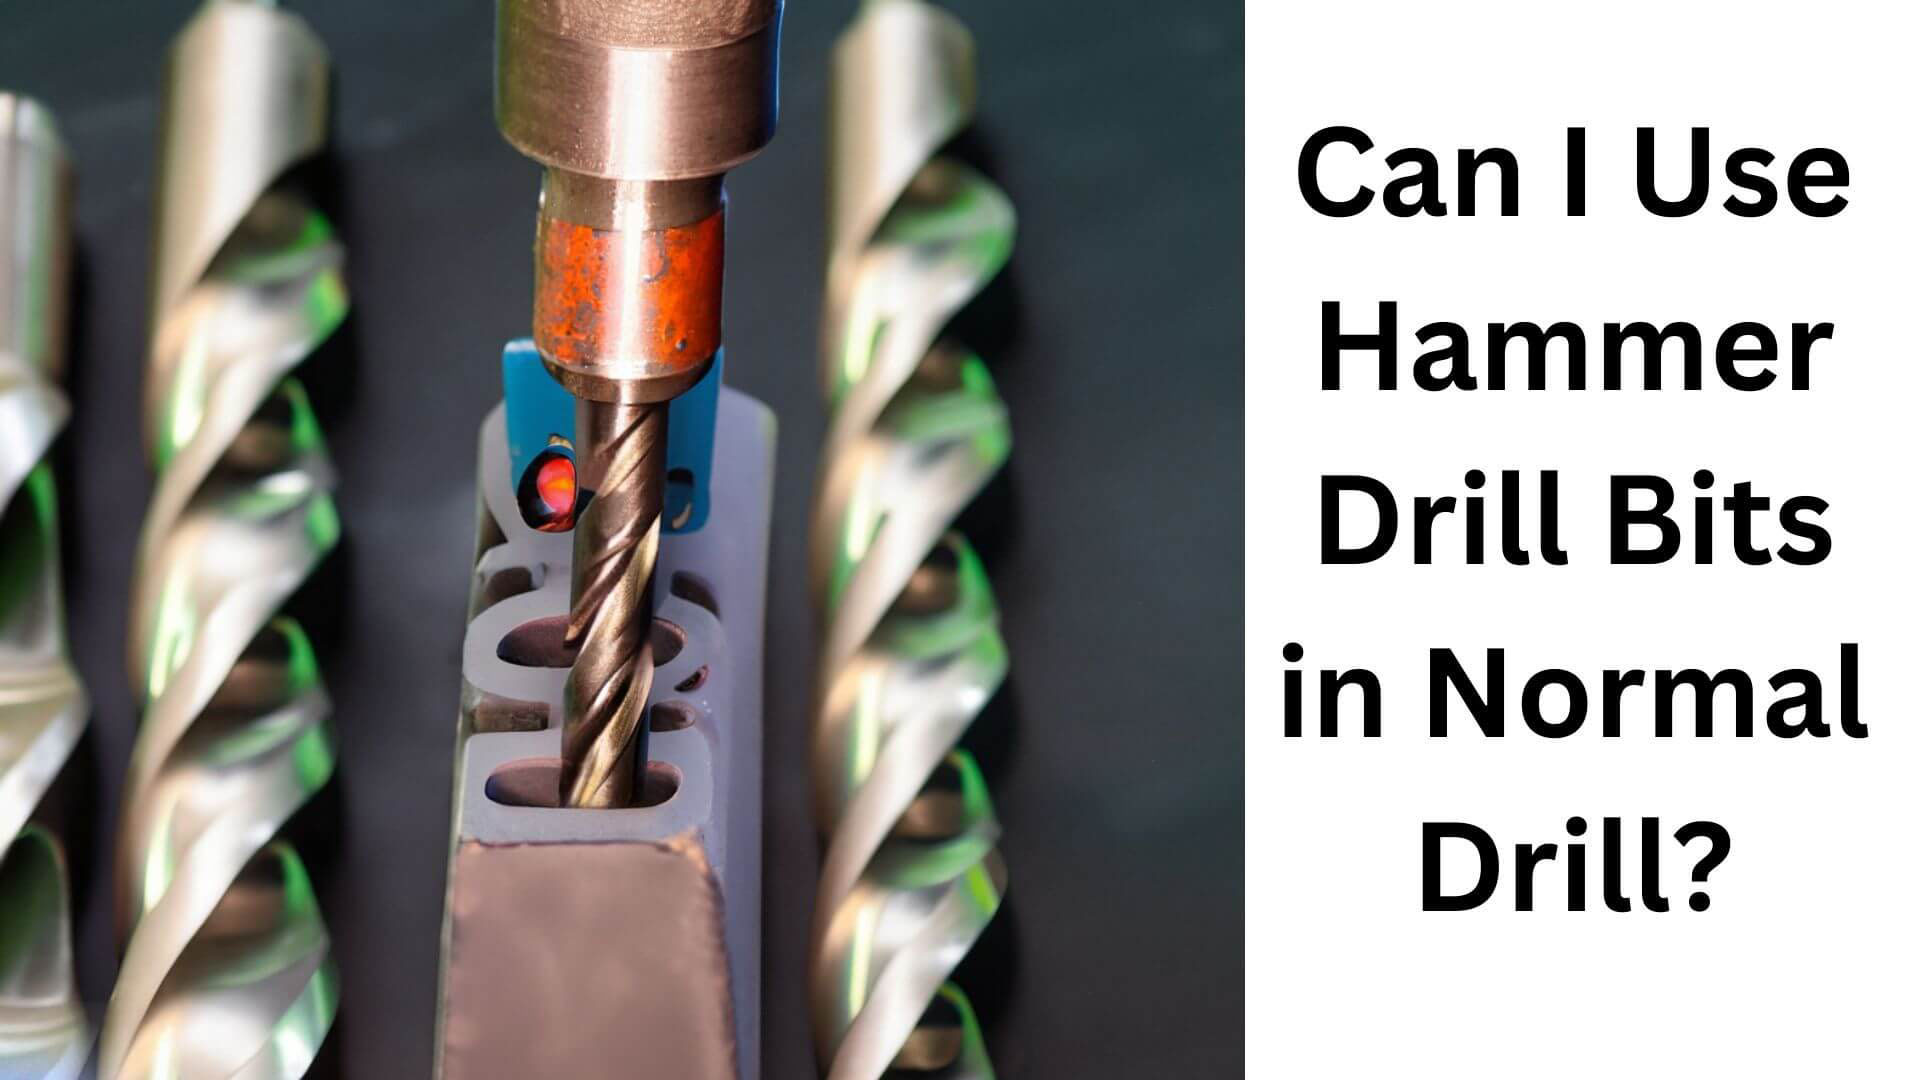 Can I Use Hammer Drill Bits in Normal Drill?